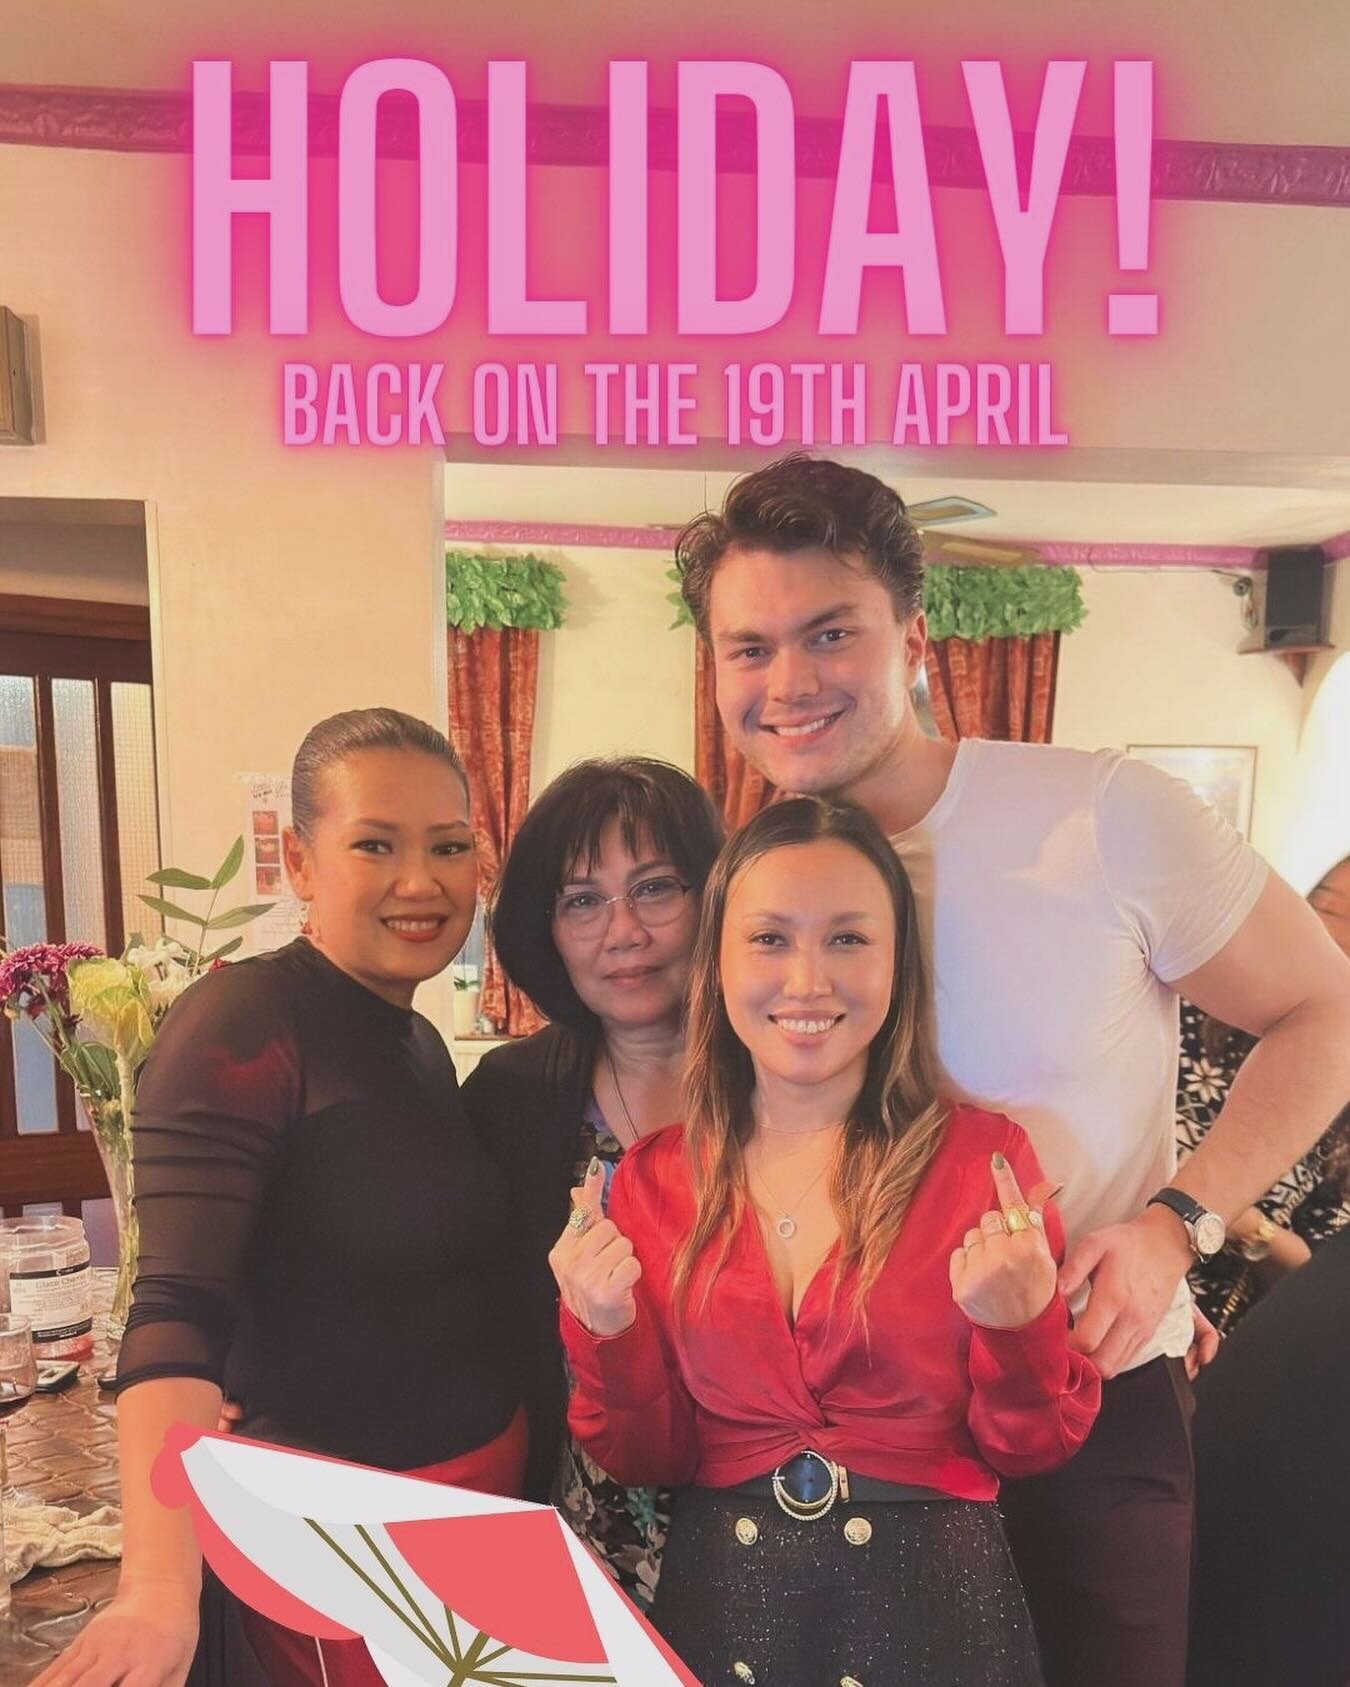 THAI ORCHID ON TOUR 🌍 🌴

We&rsquo;re all going on our easter holidays and will be back for more fun and games on Friday the 19th April ❤️

Much love to you all, see you soon x